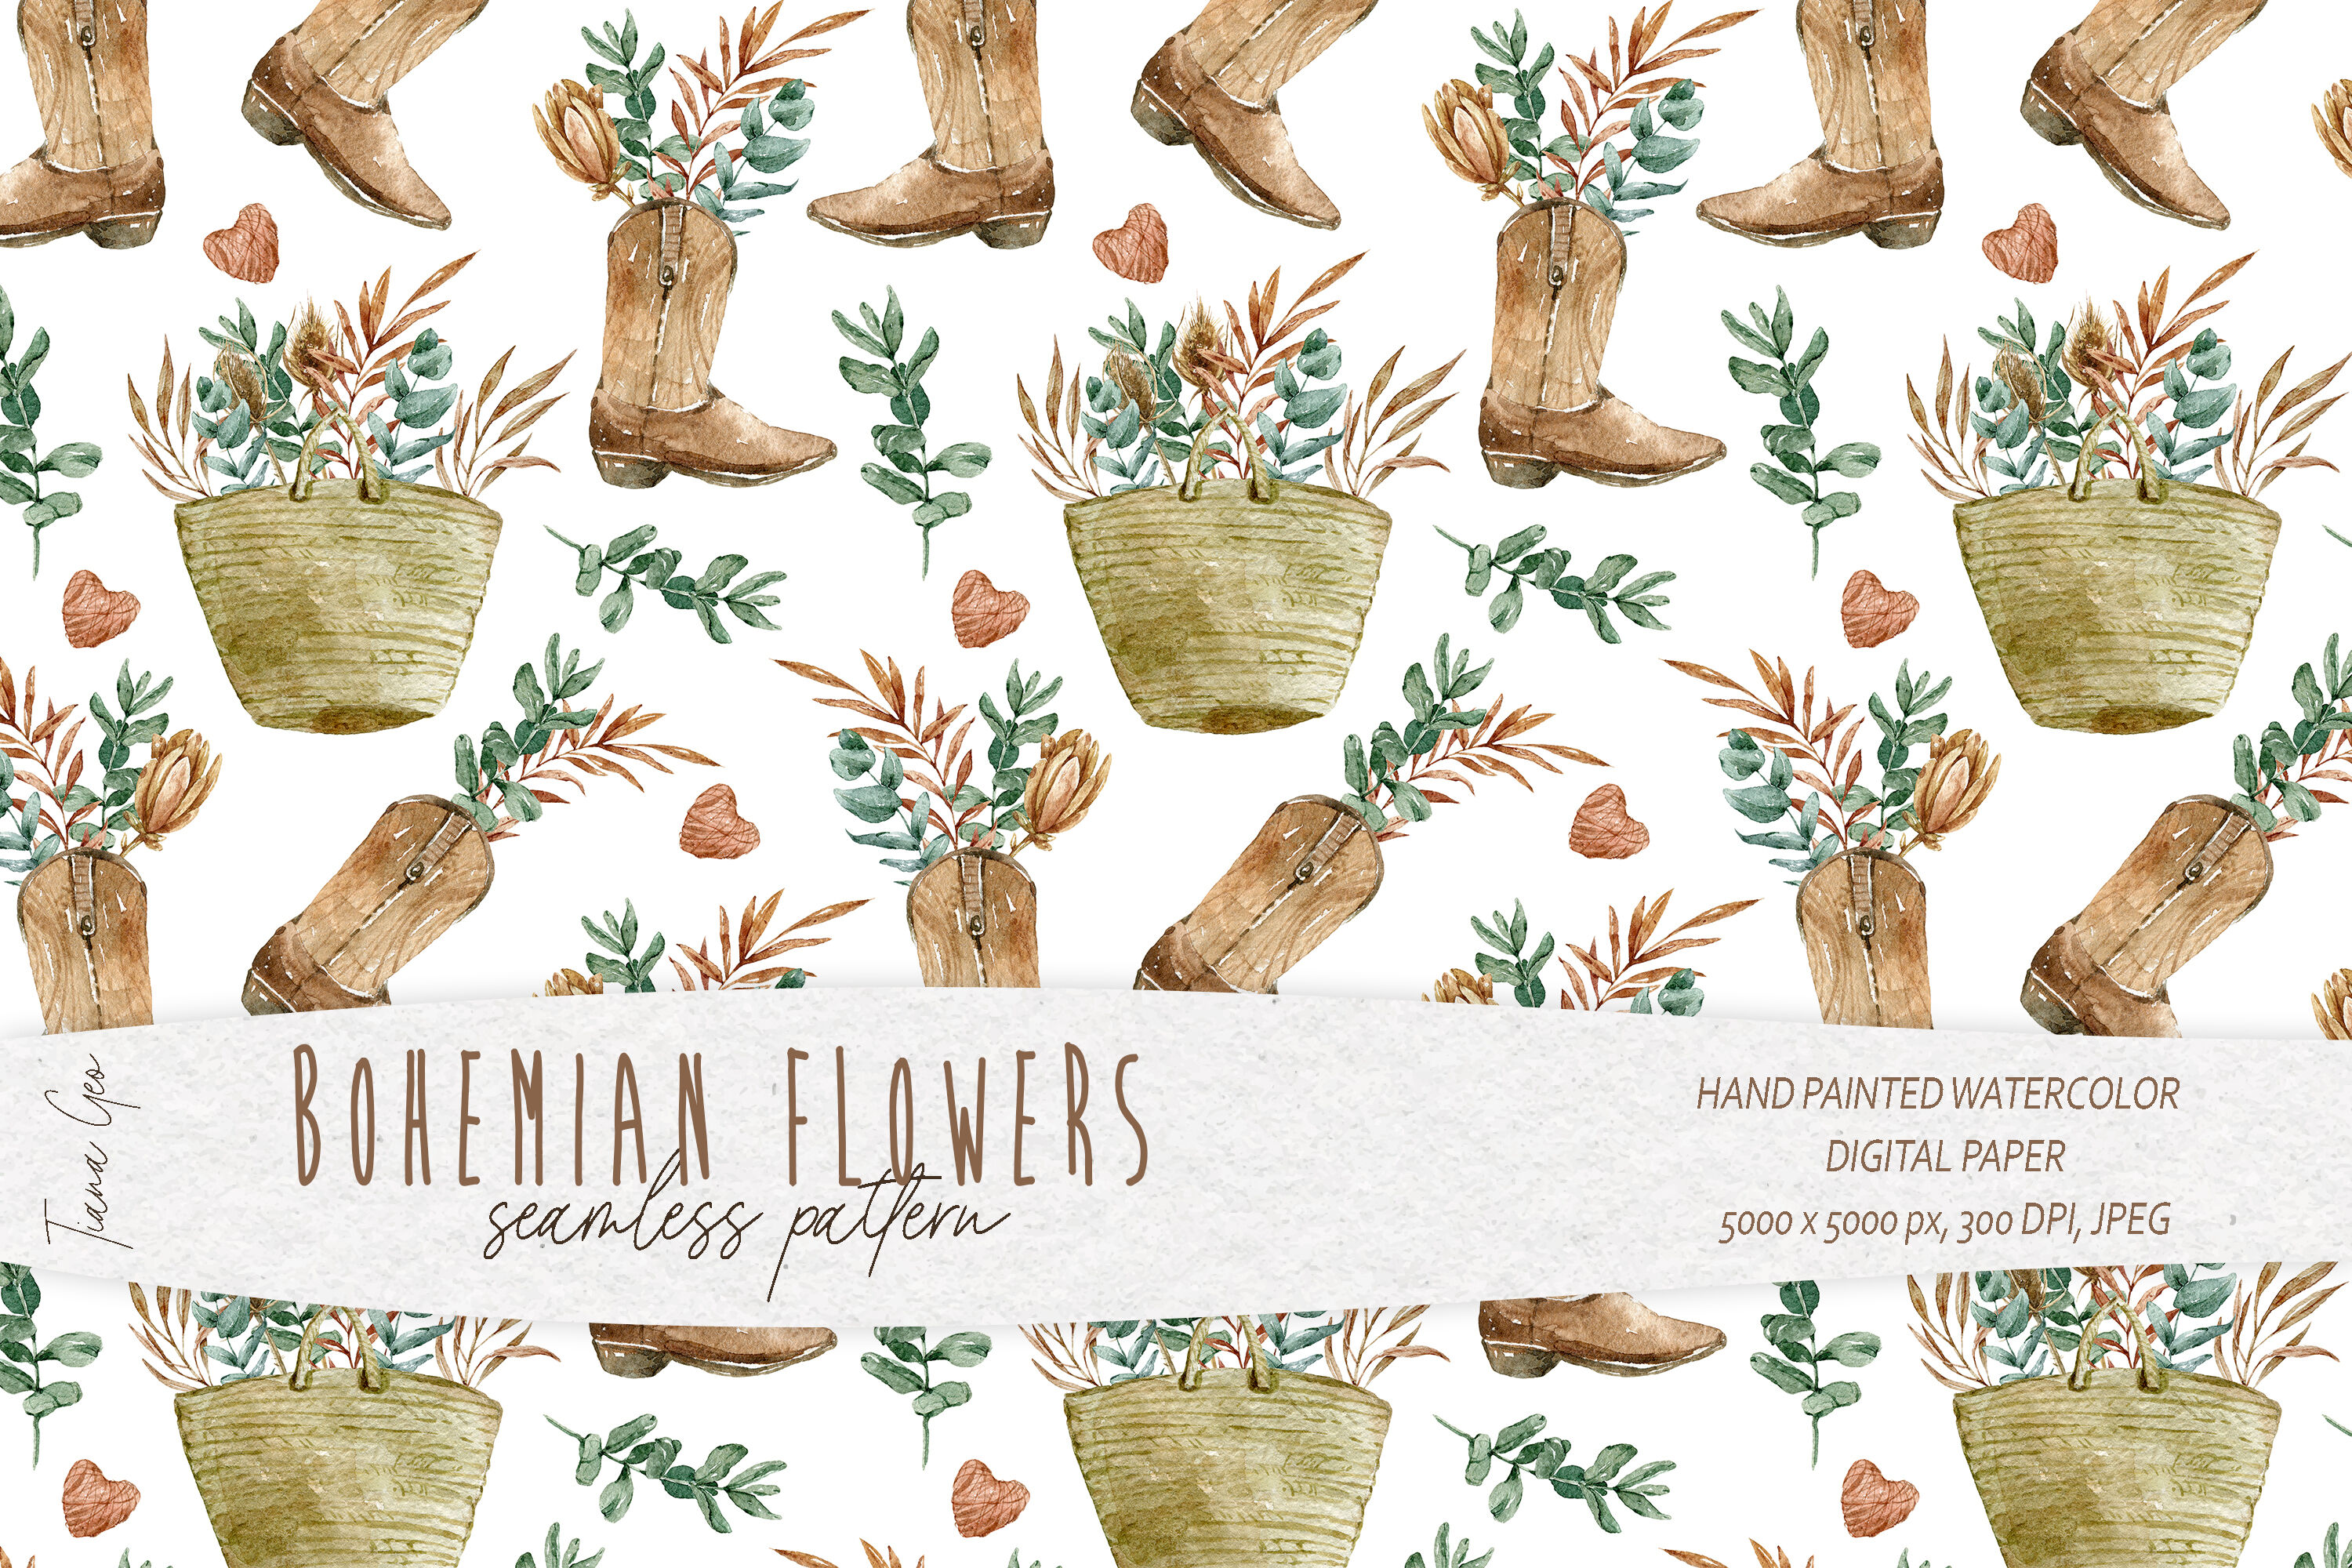 Boho Floral Scrapbook Paper -12 JPEG Graphic by Tiana Geo